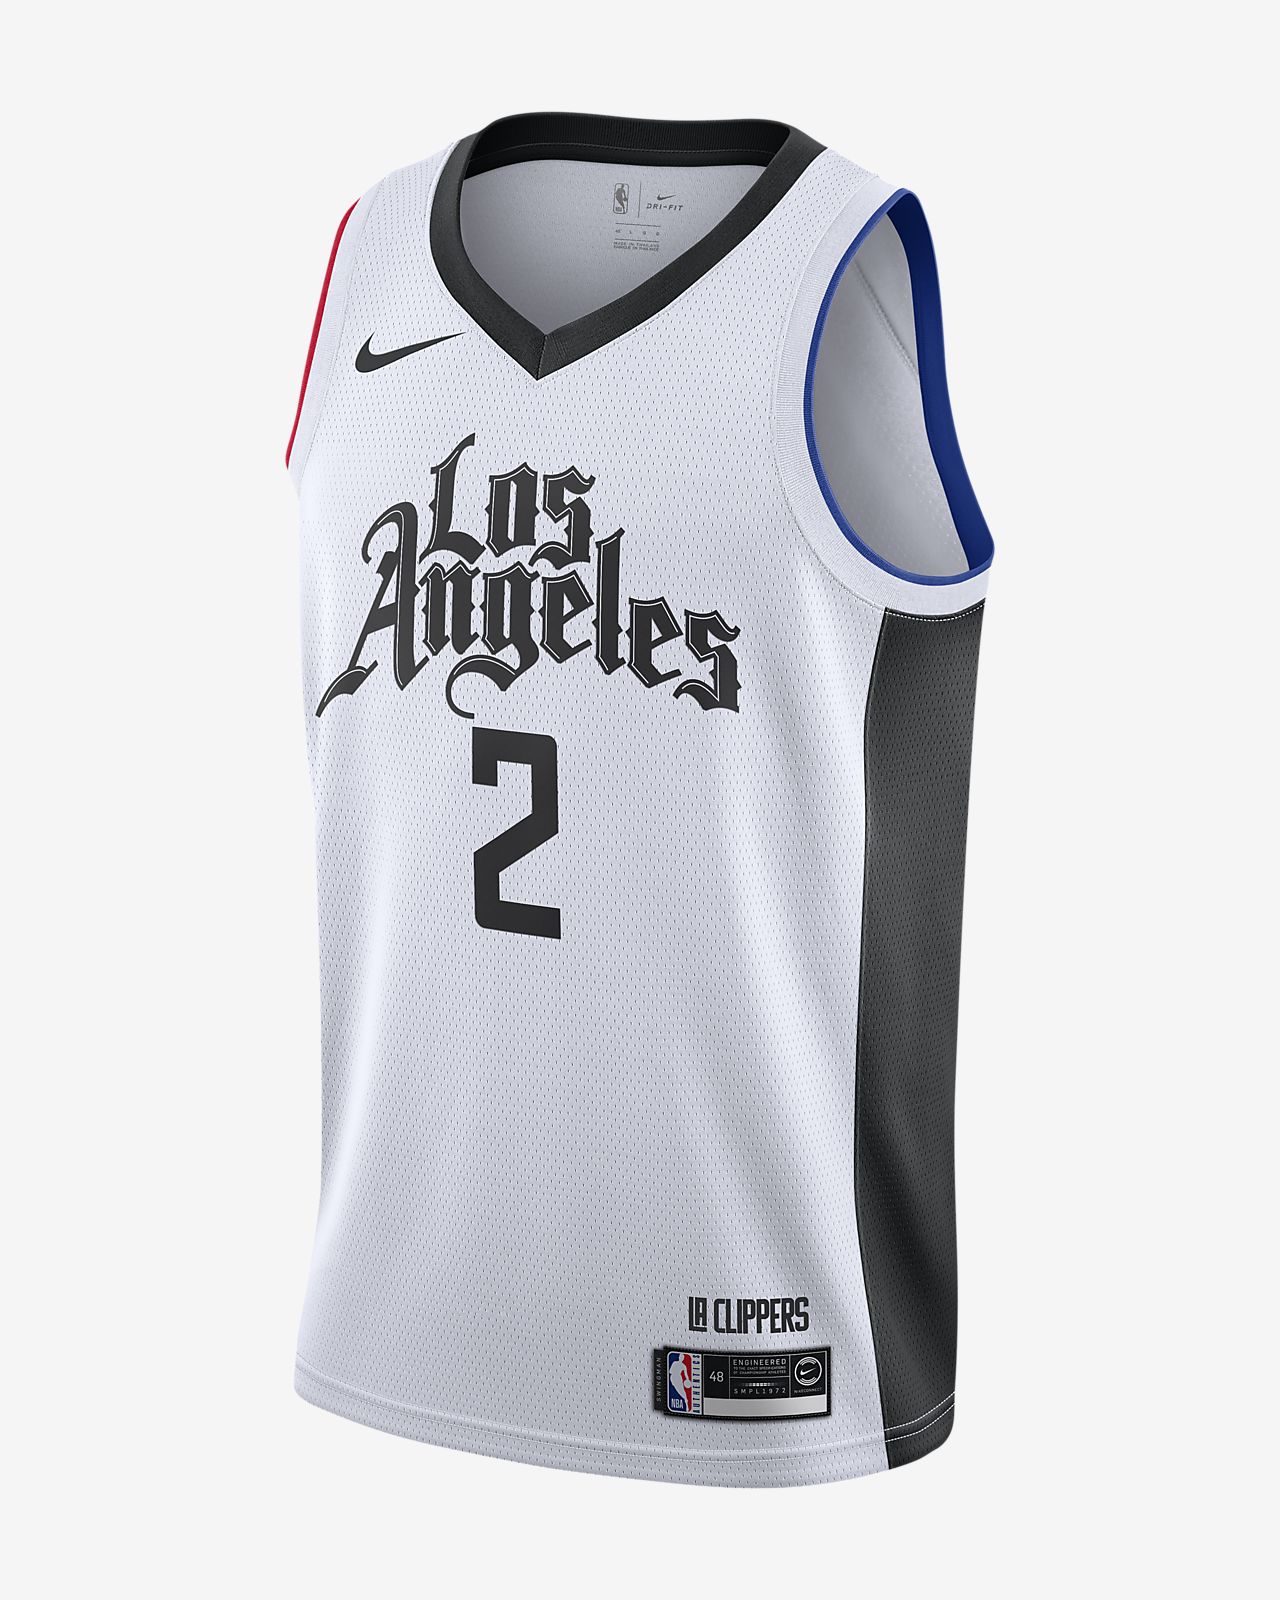 Clippers Shorts : Los Angeles Clippers Adidas Youth Replica Shorts ...